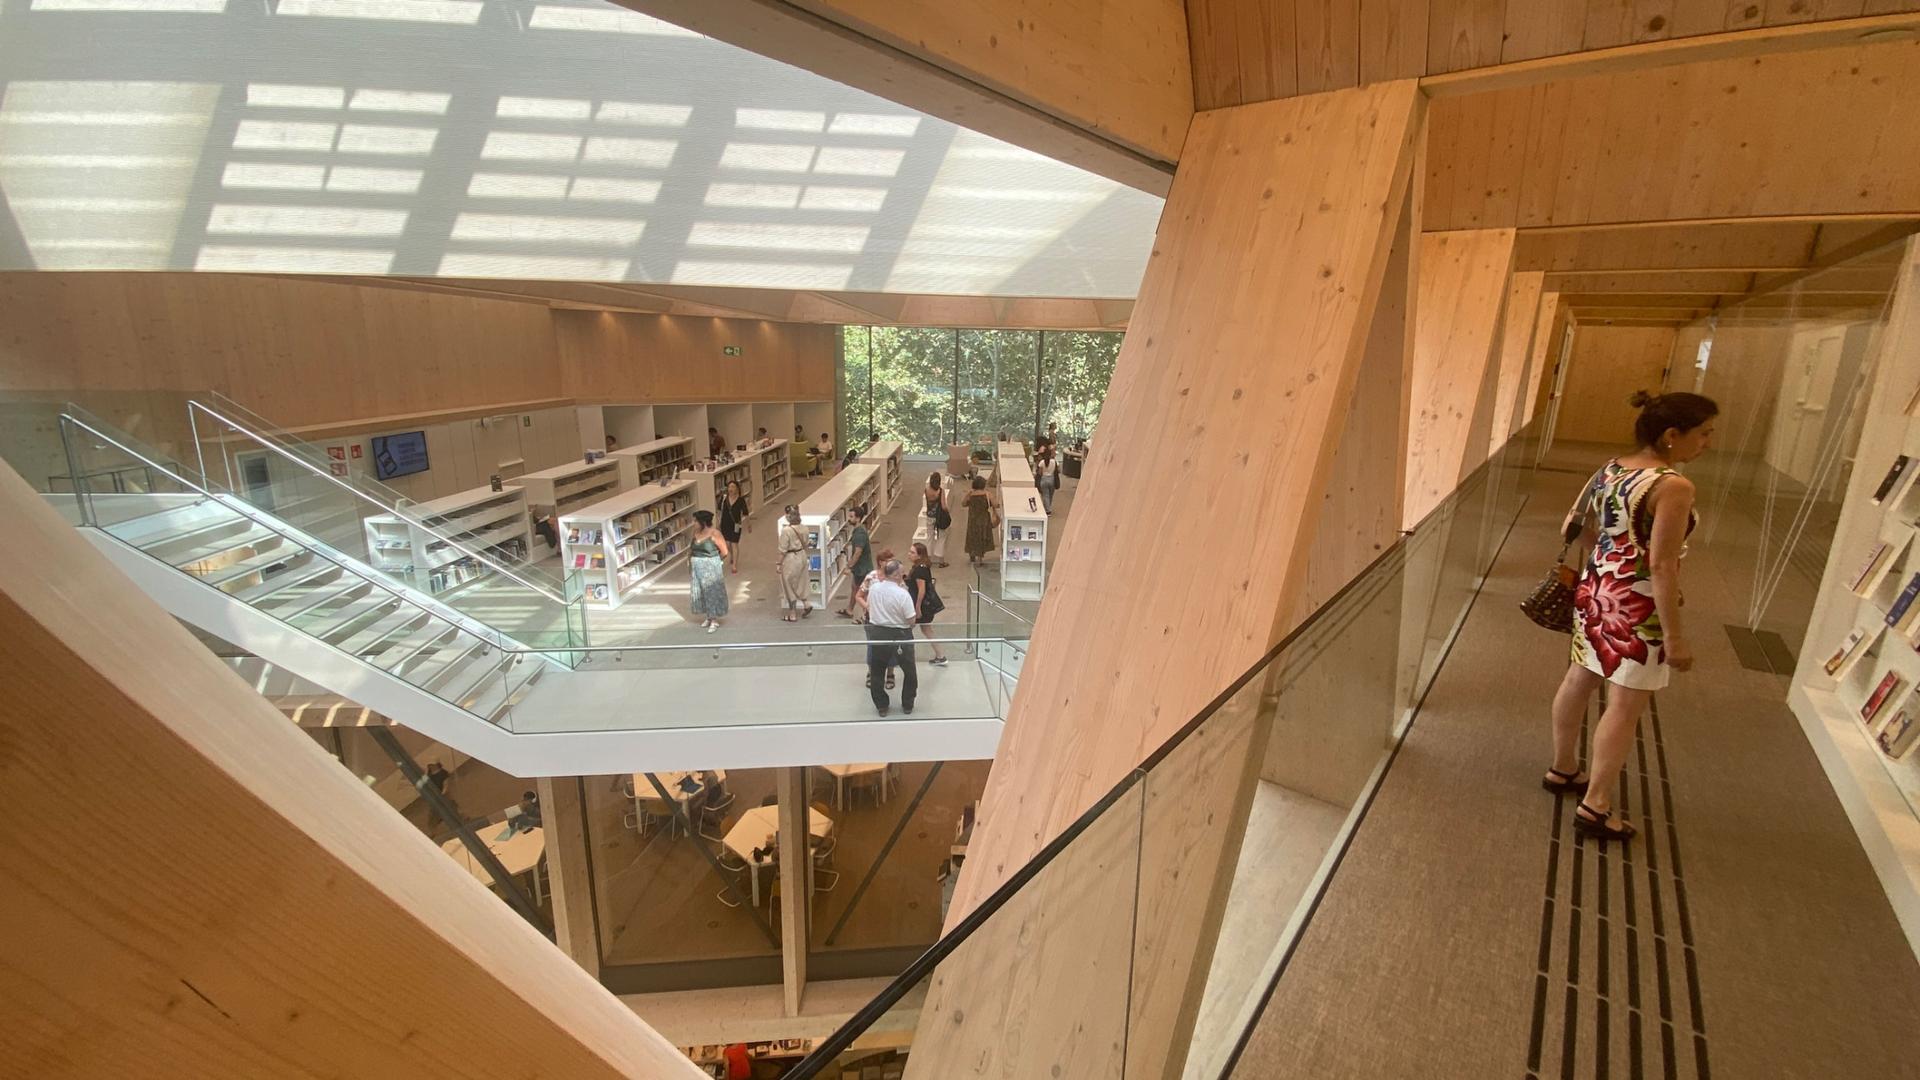 Barcelona's new neighborhood library, named after Colombian writer Gabriel Garcia Marquez, has seen a boost in visitors after winning the World’s Best New Library of the Year 2023 from the International Federation of Libraries. 